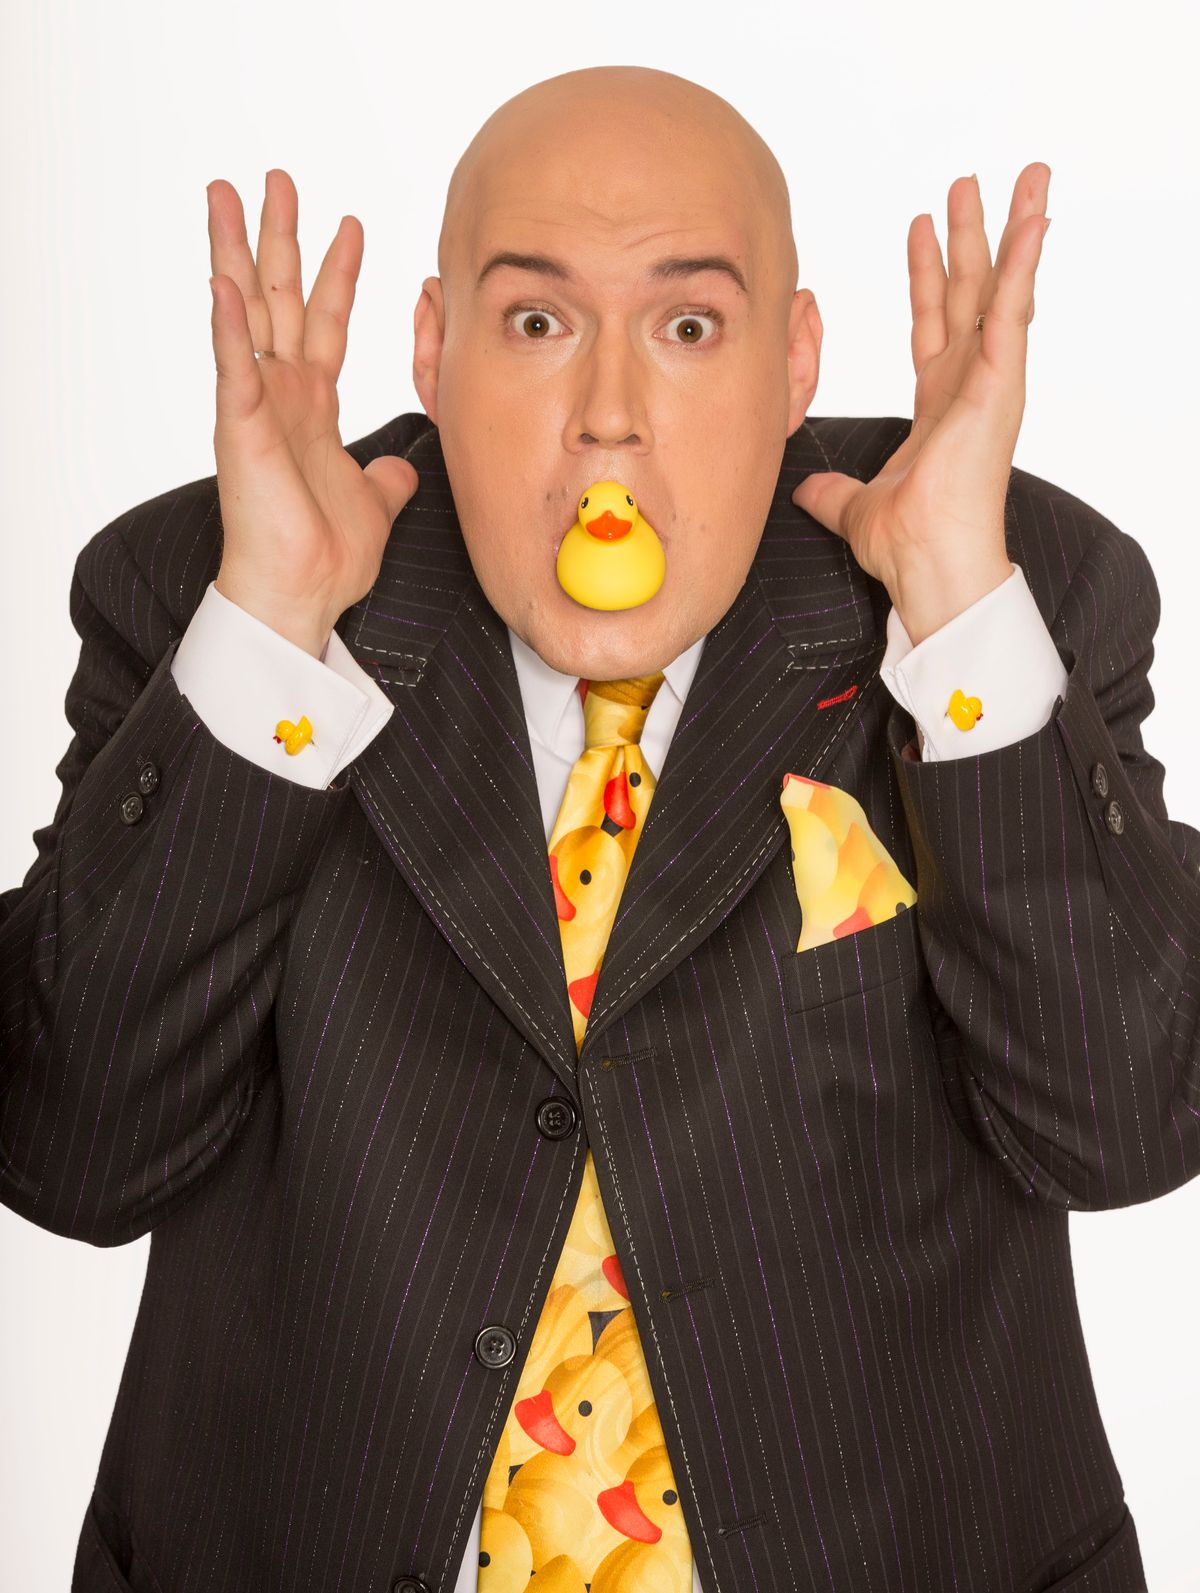 Adam London strikes a funny pose with rubber ducky in his mouth for Adam London Laughternoon show